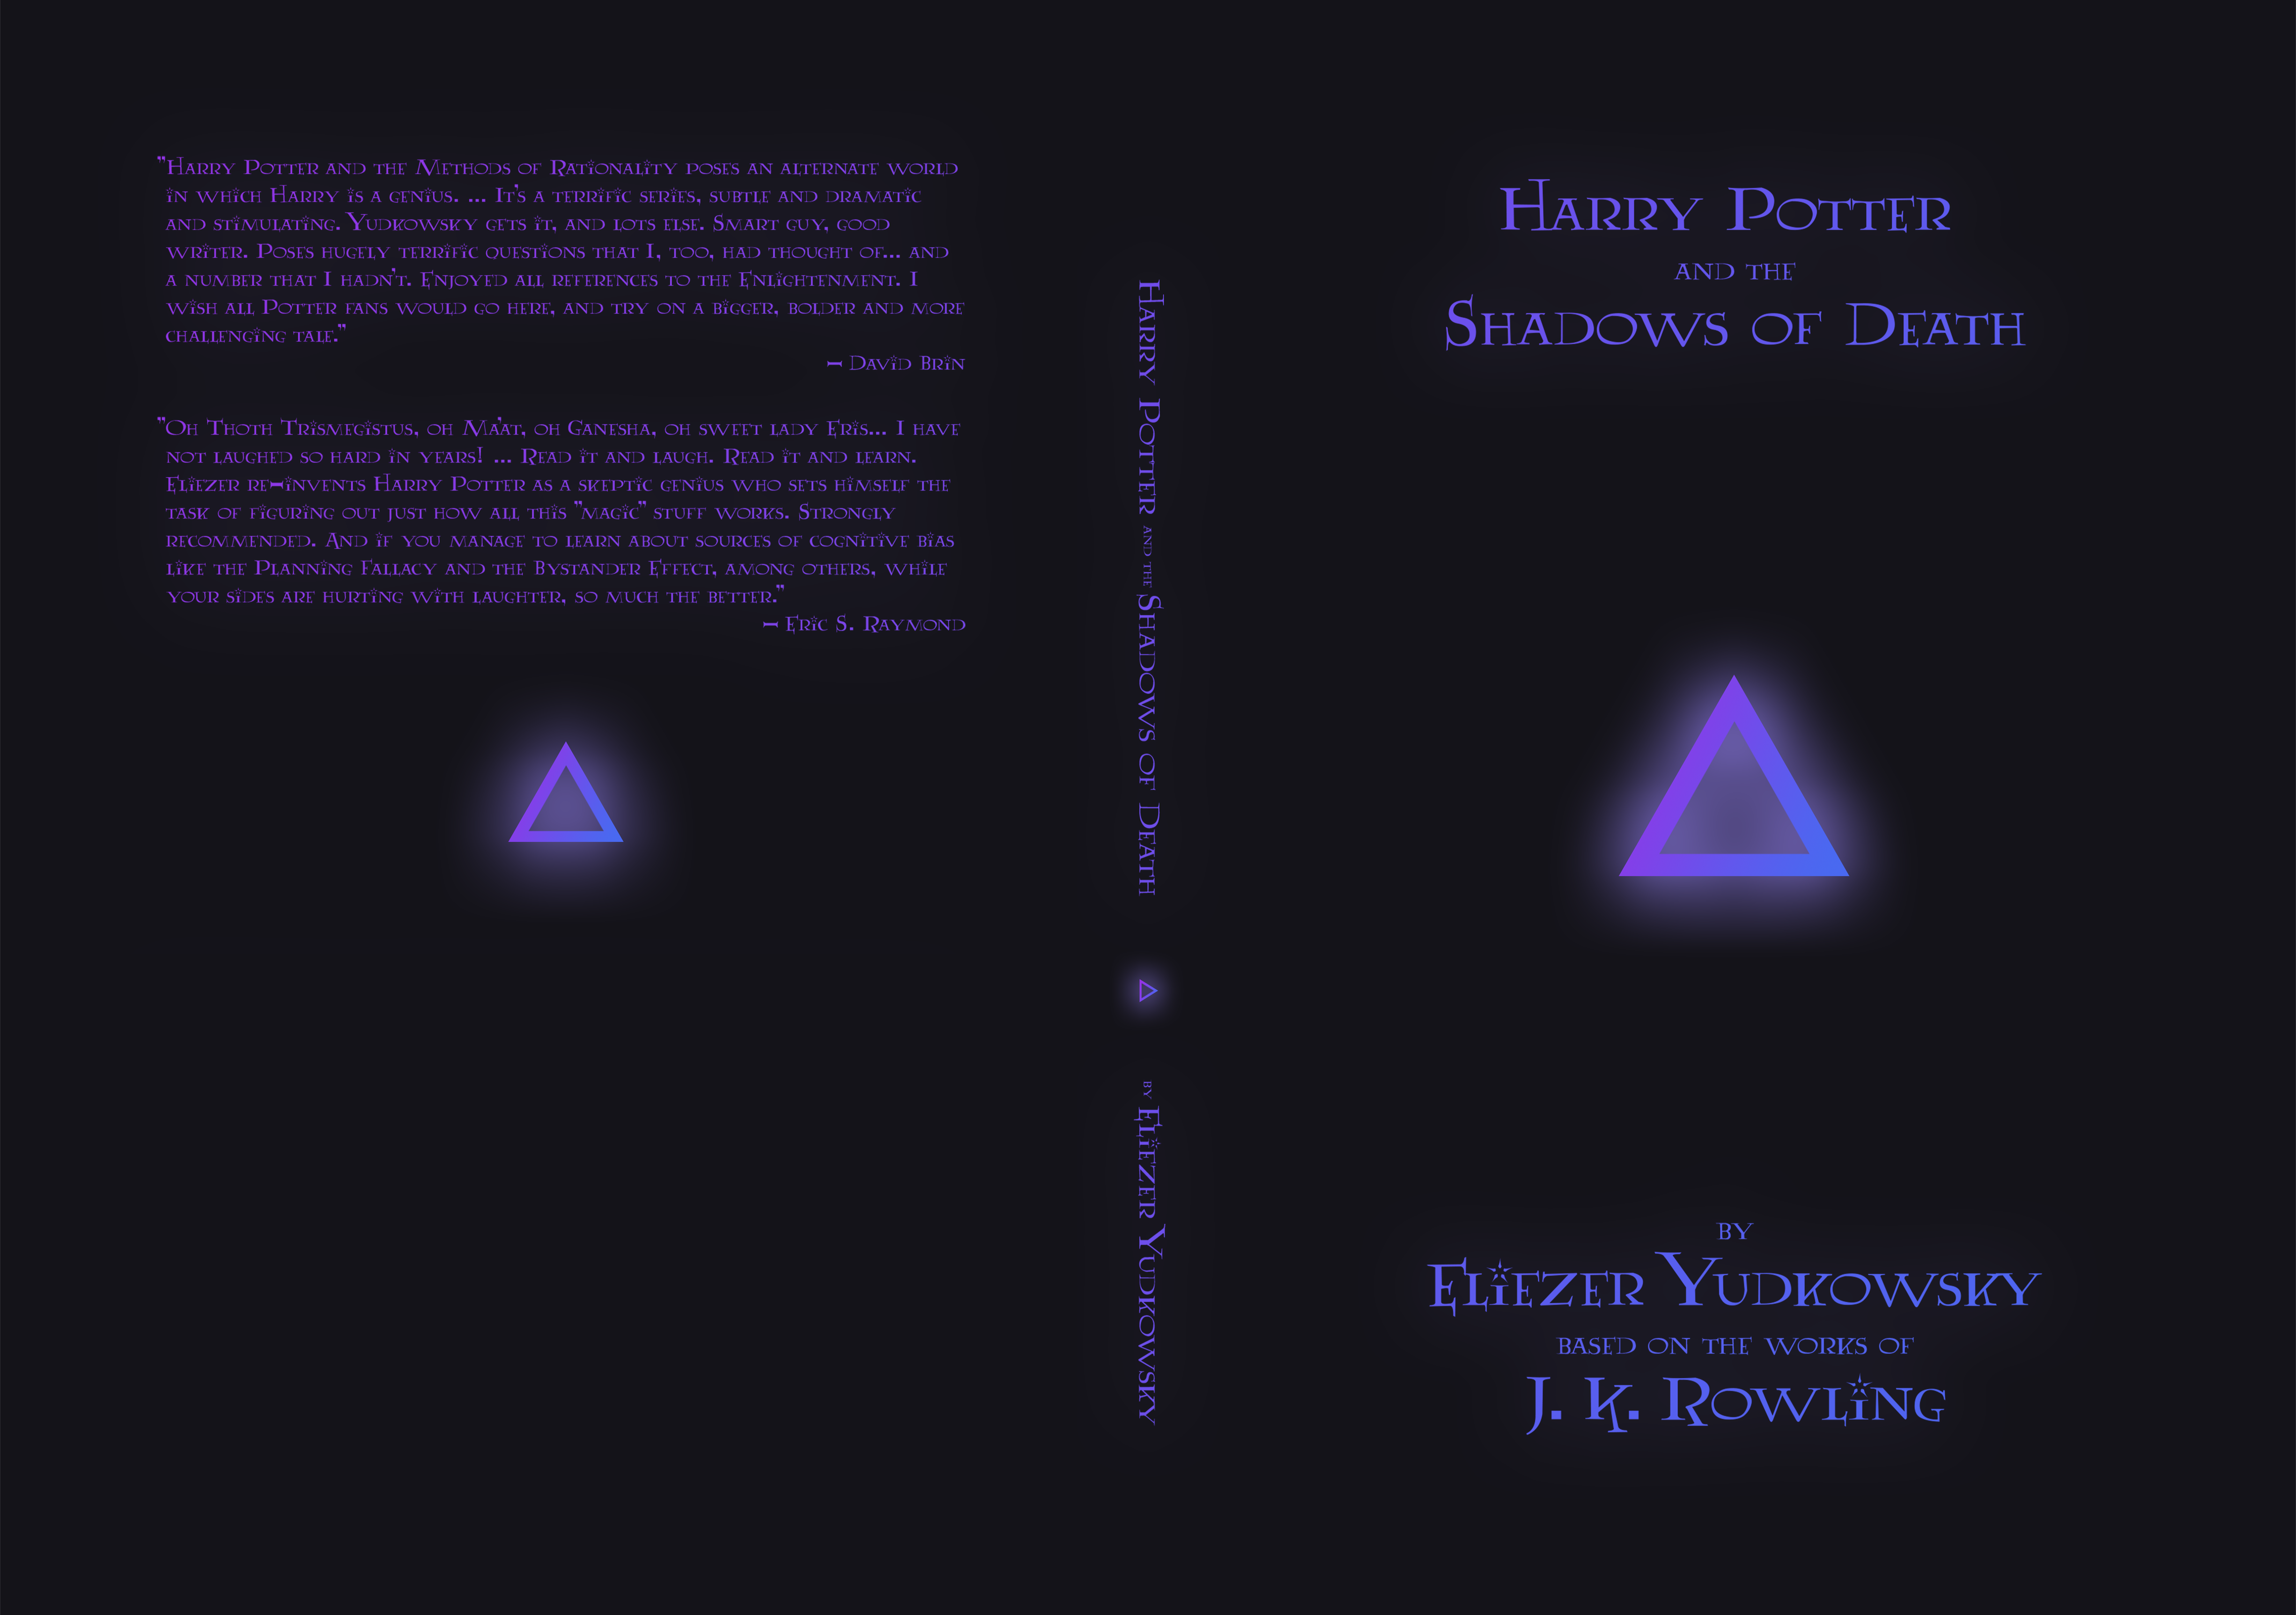 Volume 3: Harry Potter and the Shadows of Death